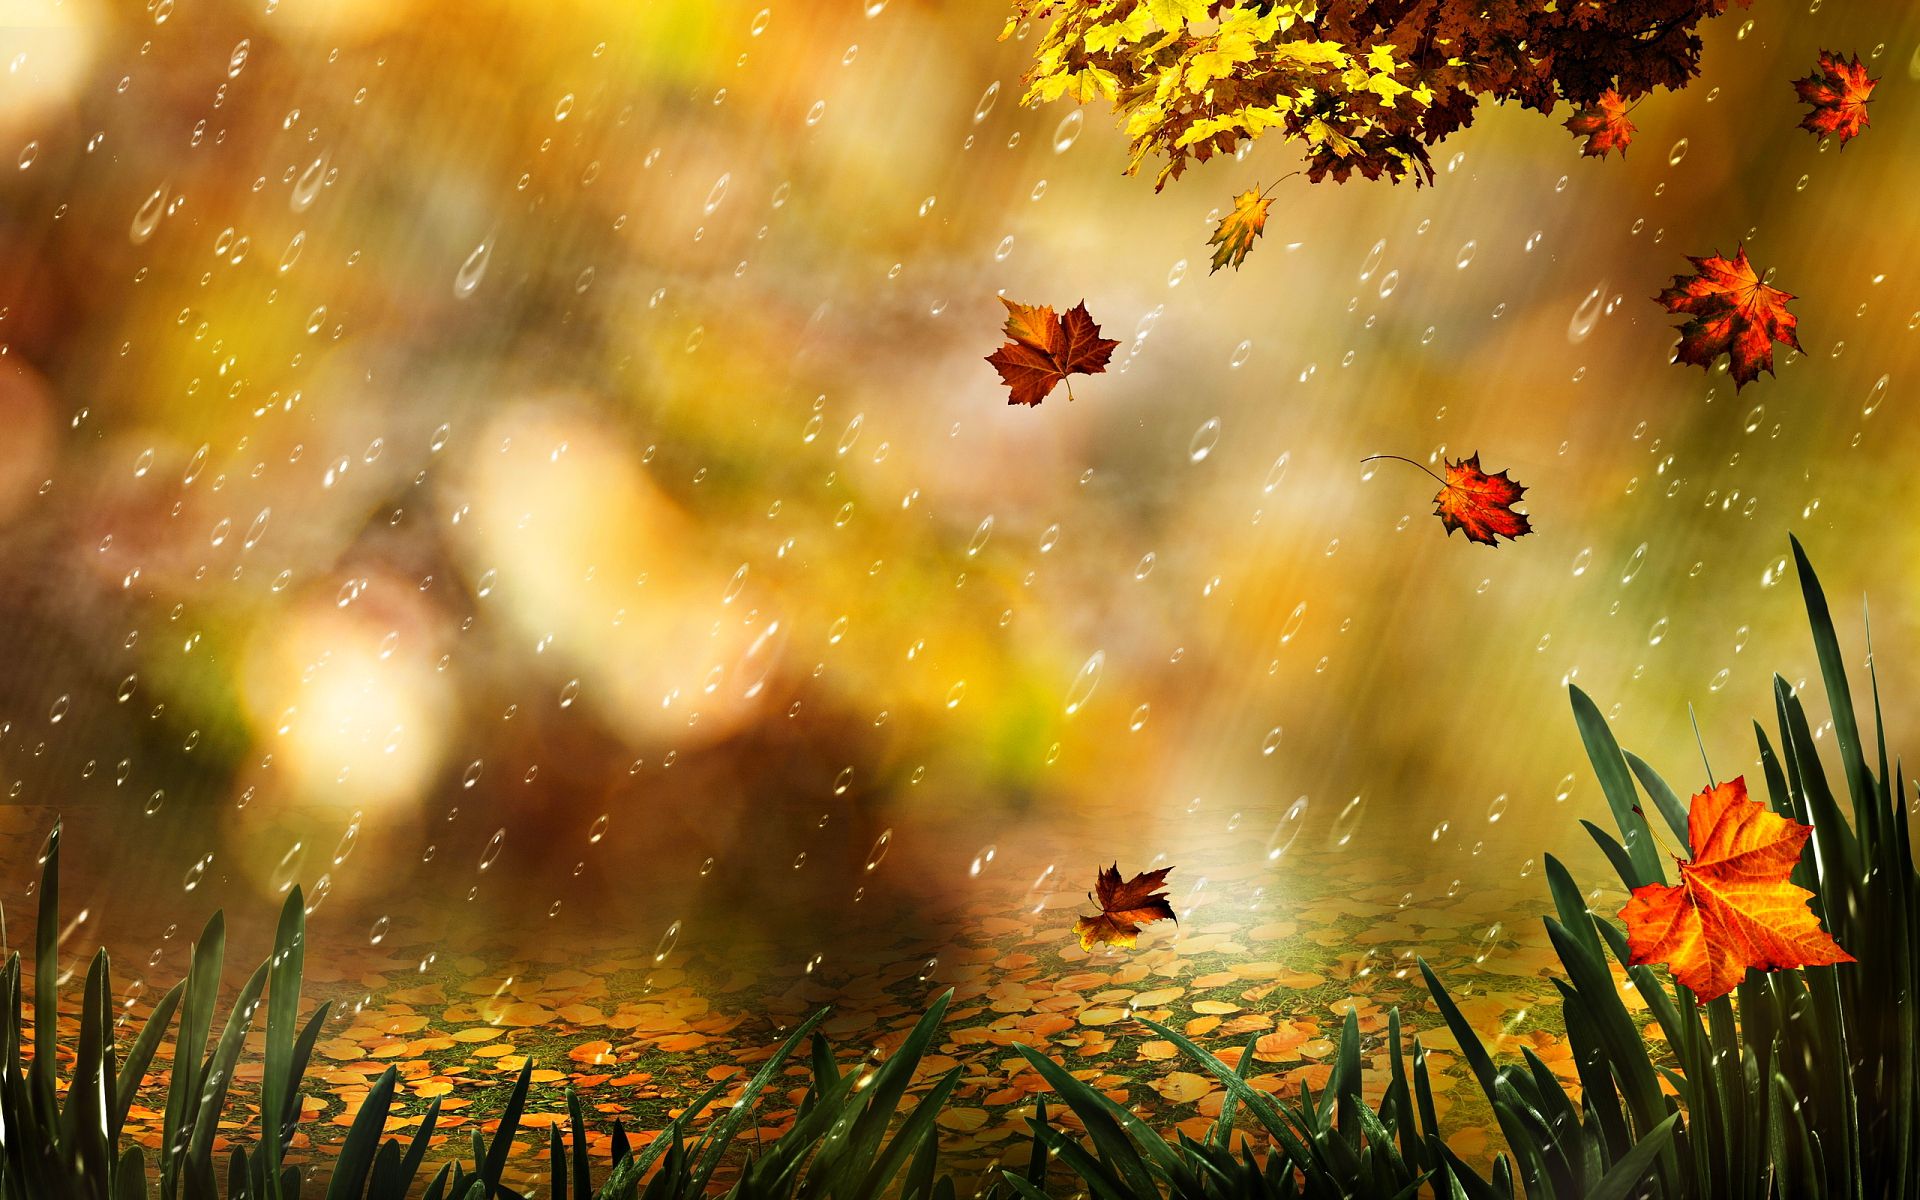 rainy weather wallpapers,nature,natural landscape,leaf,natural environment,yellow